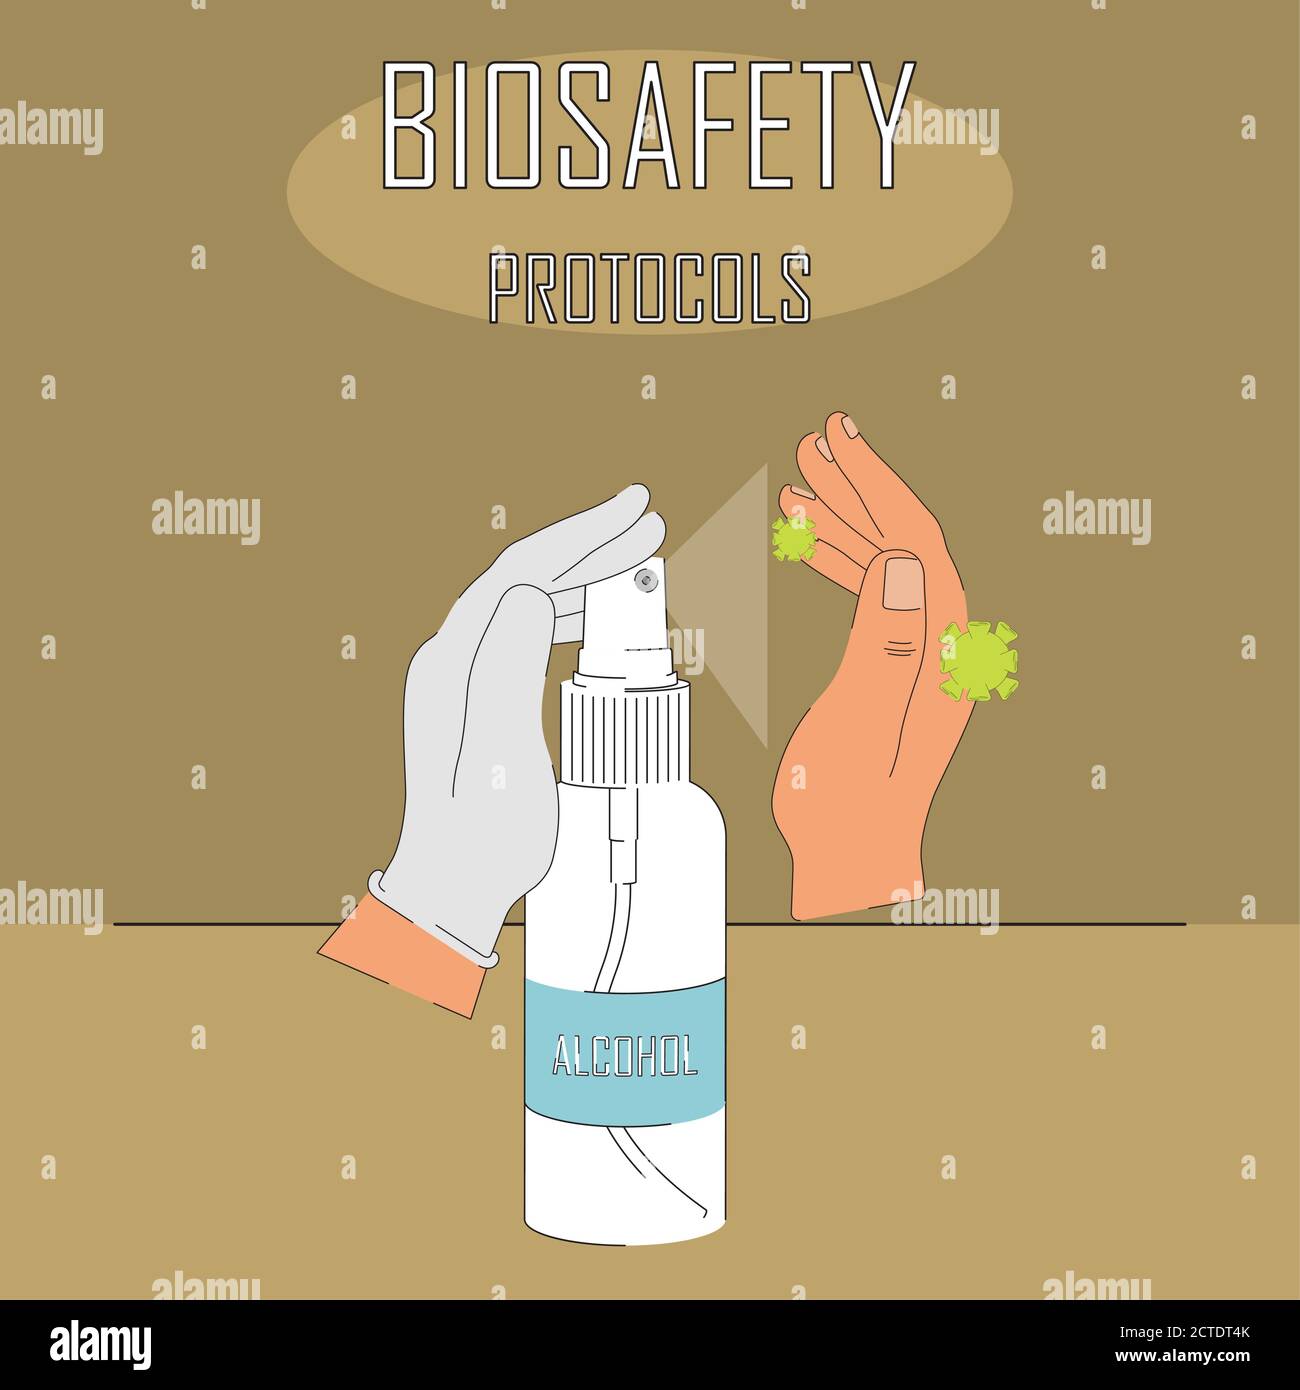 Biosafety protocols poster. Make use of alcohol - Vector Stock Vector